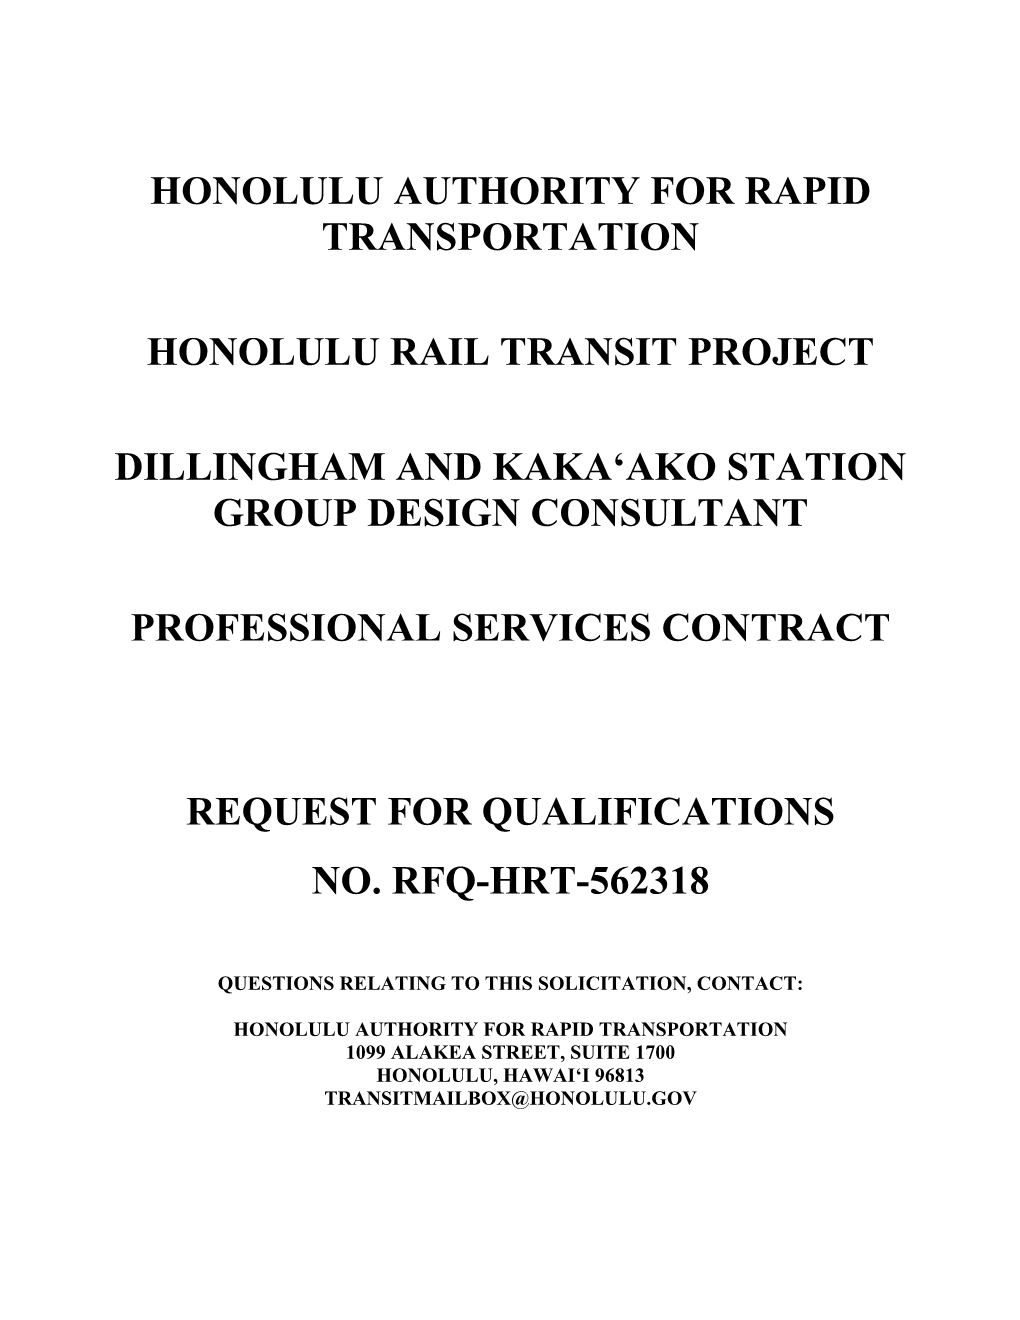 Dillingham and Kaka'ako Station Group Design Consultant